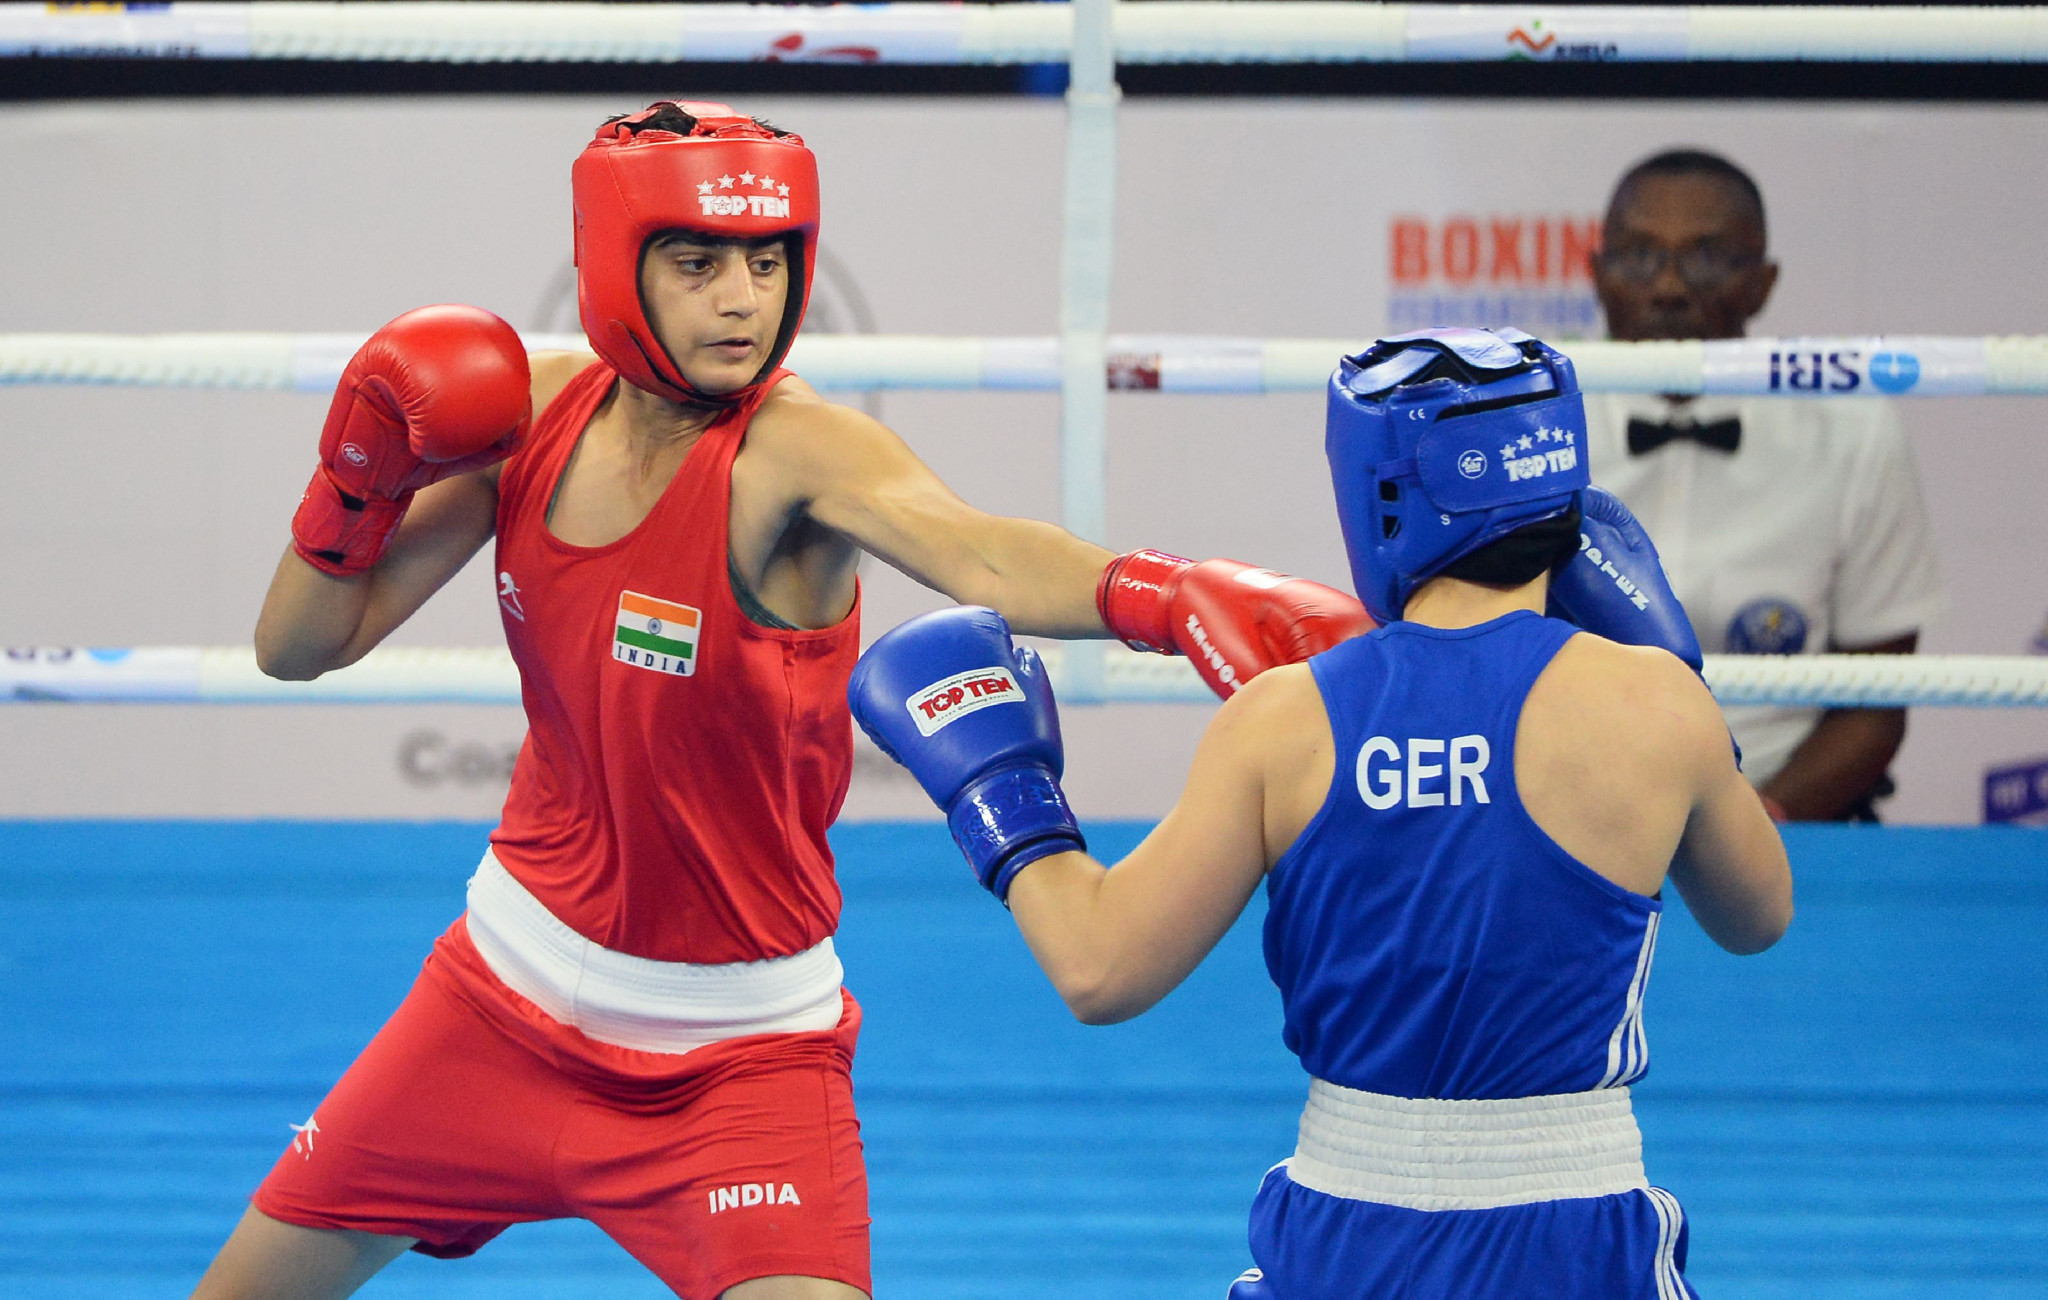 World Championships silver medallist Sonia Chahal of India progressed to the quarter-finals of the women's featherweight division ©Getty Images